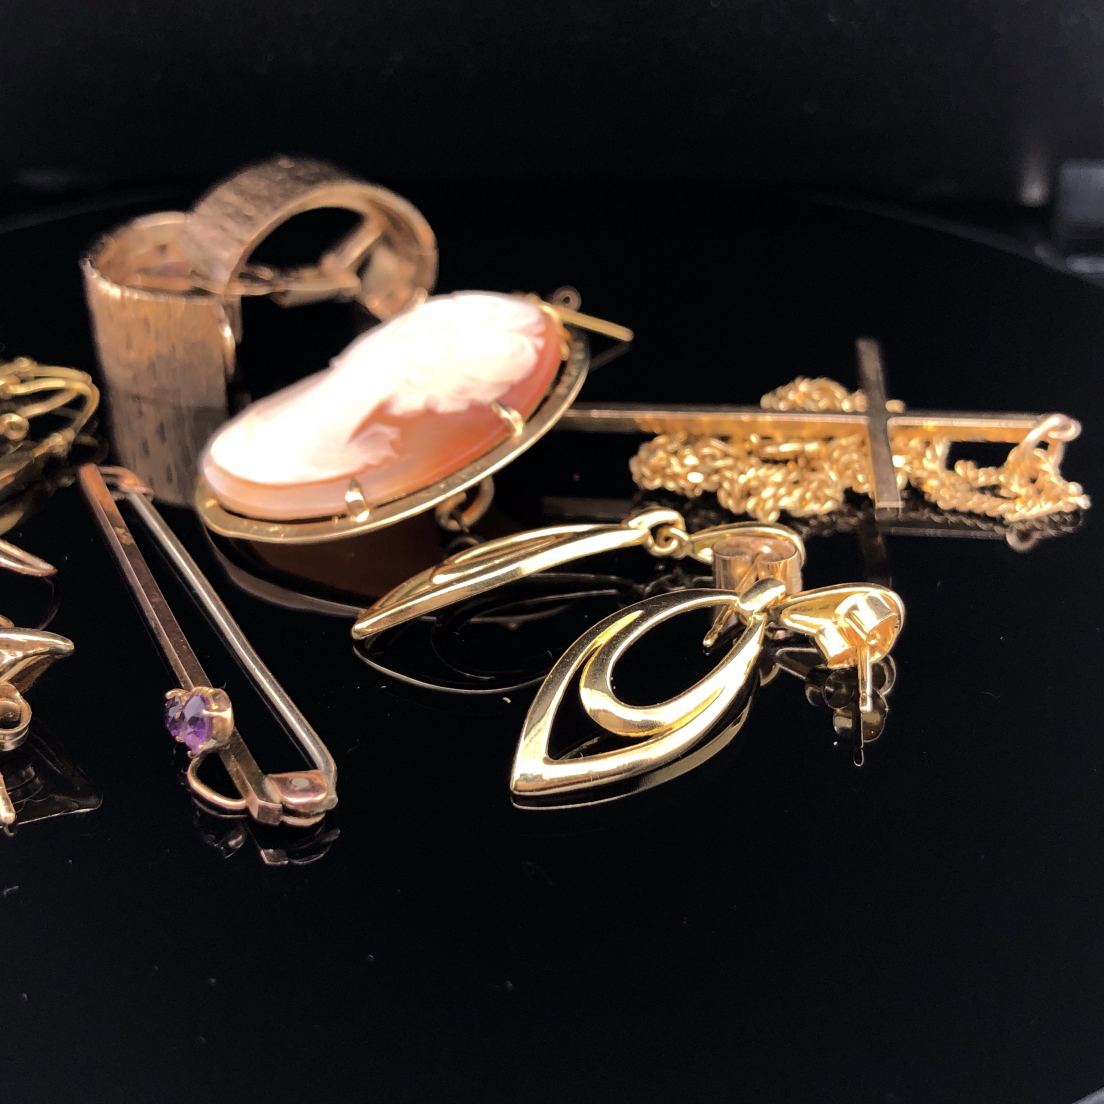 A 9ct STAMPED GOLD CROSS AND CHAIN, A PAIR OF 9ct GOLD BRICK STYLE CLIP ON EARRINGS, A PAIR OF 9ct - Image 6 of 6